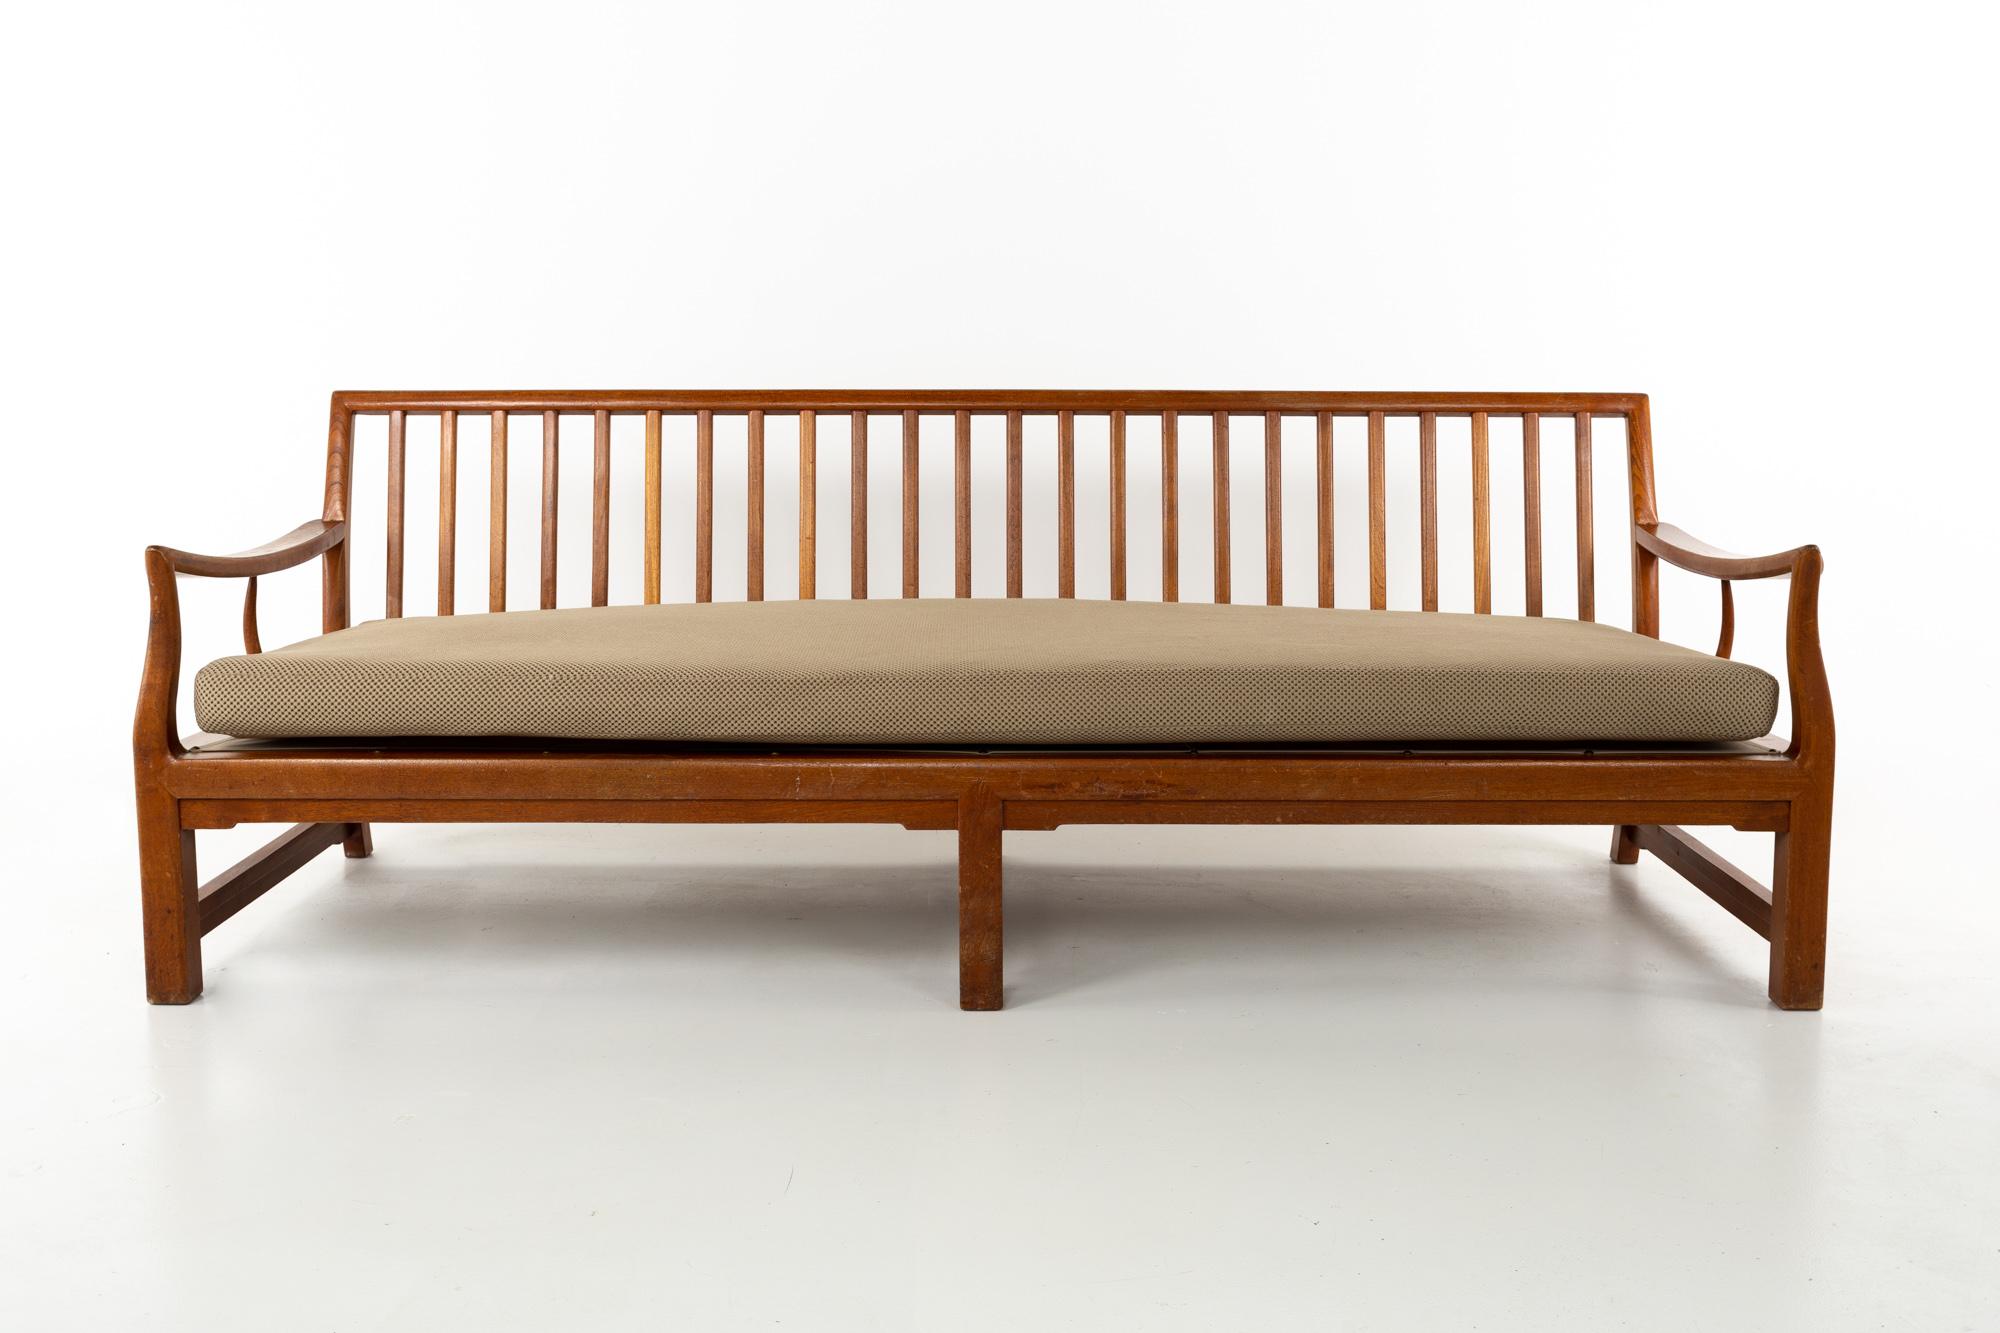 Mid Century convertible daybed sofa
This piece is 81 wide x 30 deep x 30 inches high, with a seat height of 16 and arm height of 22 inches

This price includes getting this piece in what we call restored vintage condition. That means the piece is